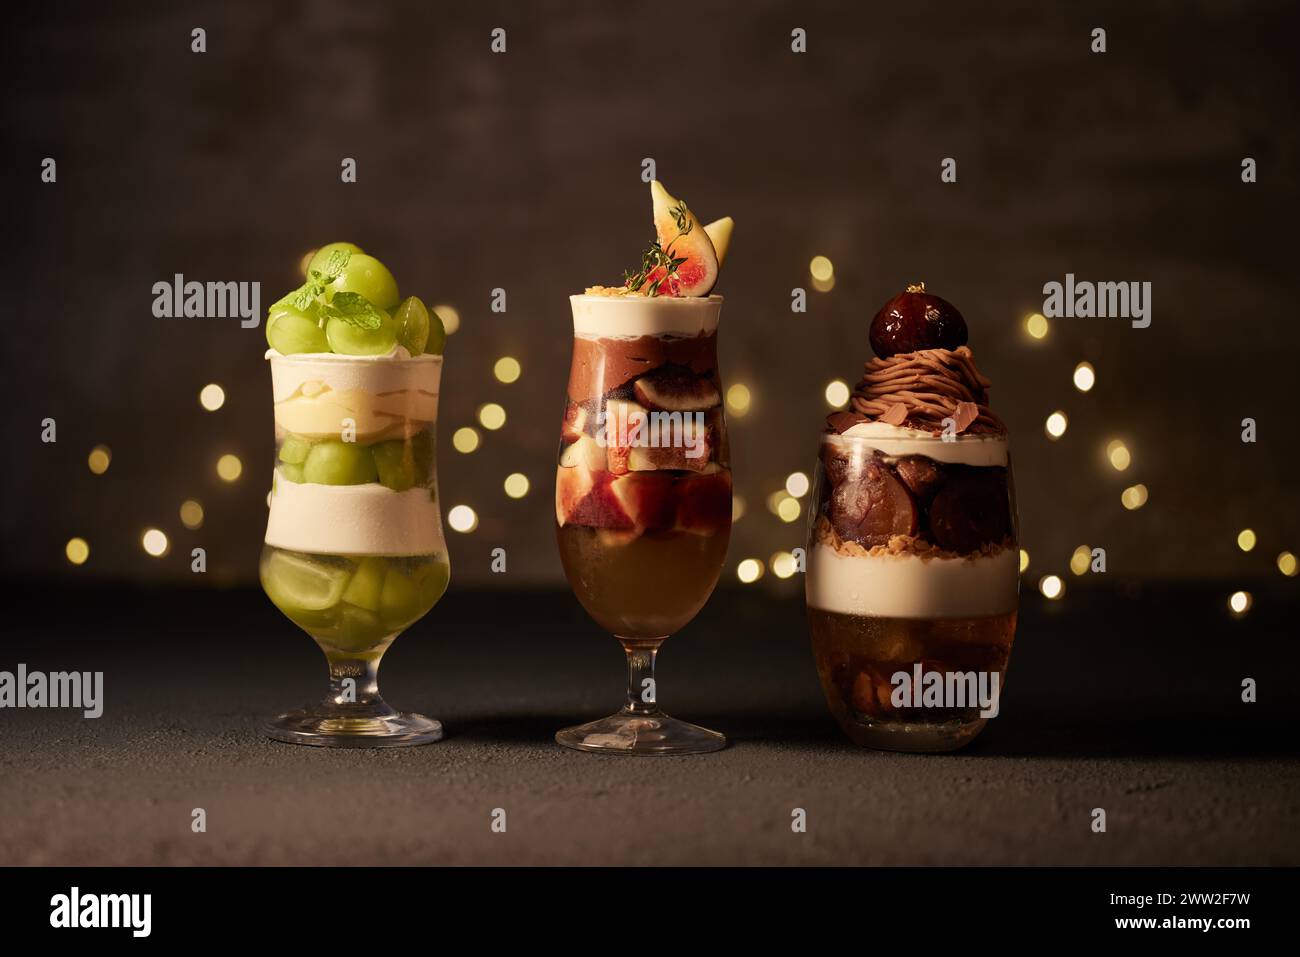 Three different desserts in glasses on a dark background Stock Photo